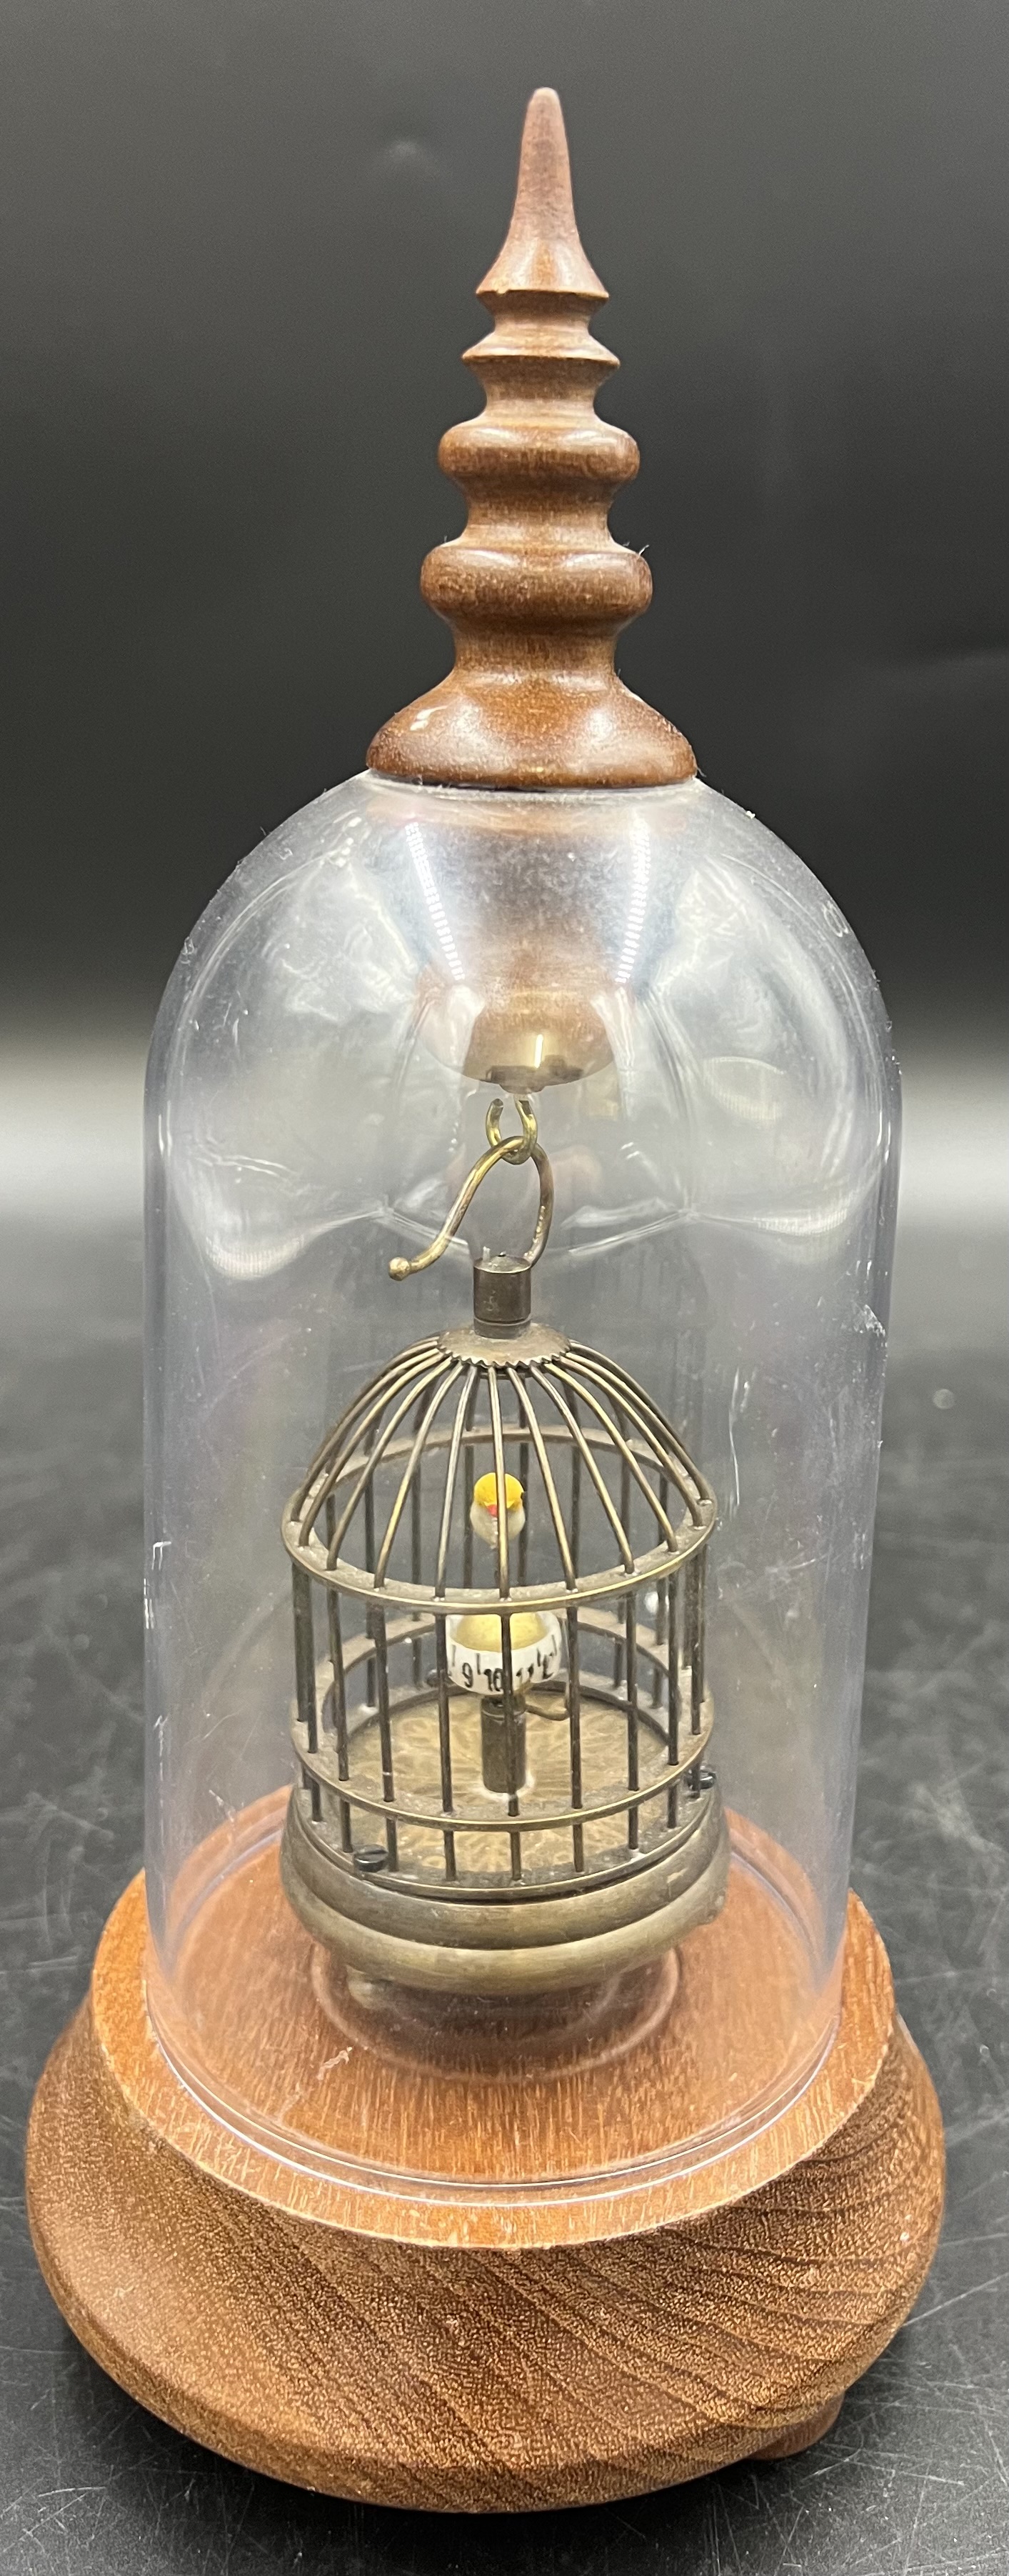 A novelty clock displayed under a clear dome on a wooden base. The vintage style metal birdcage - Image 3 of 4